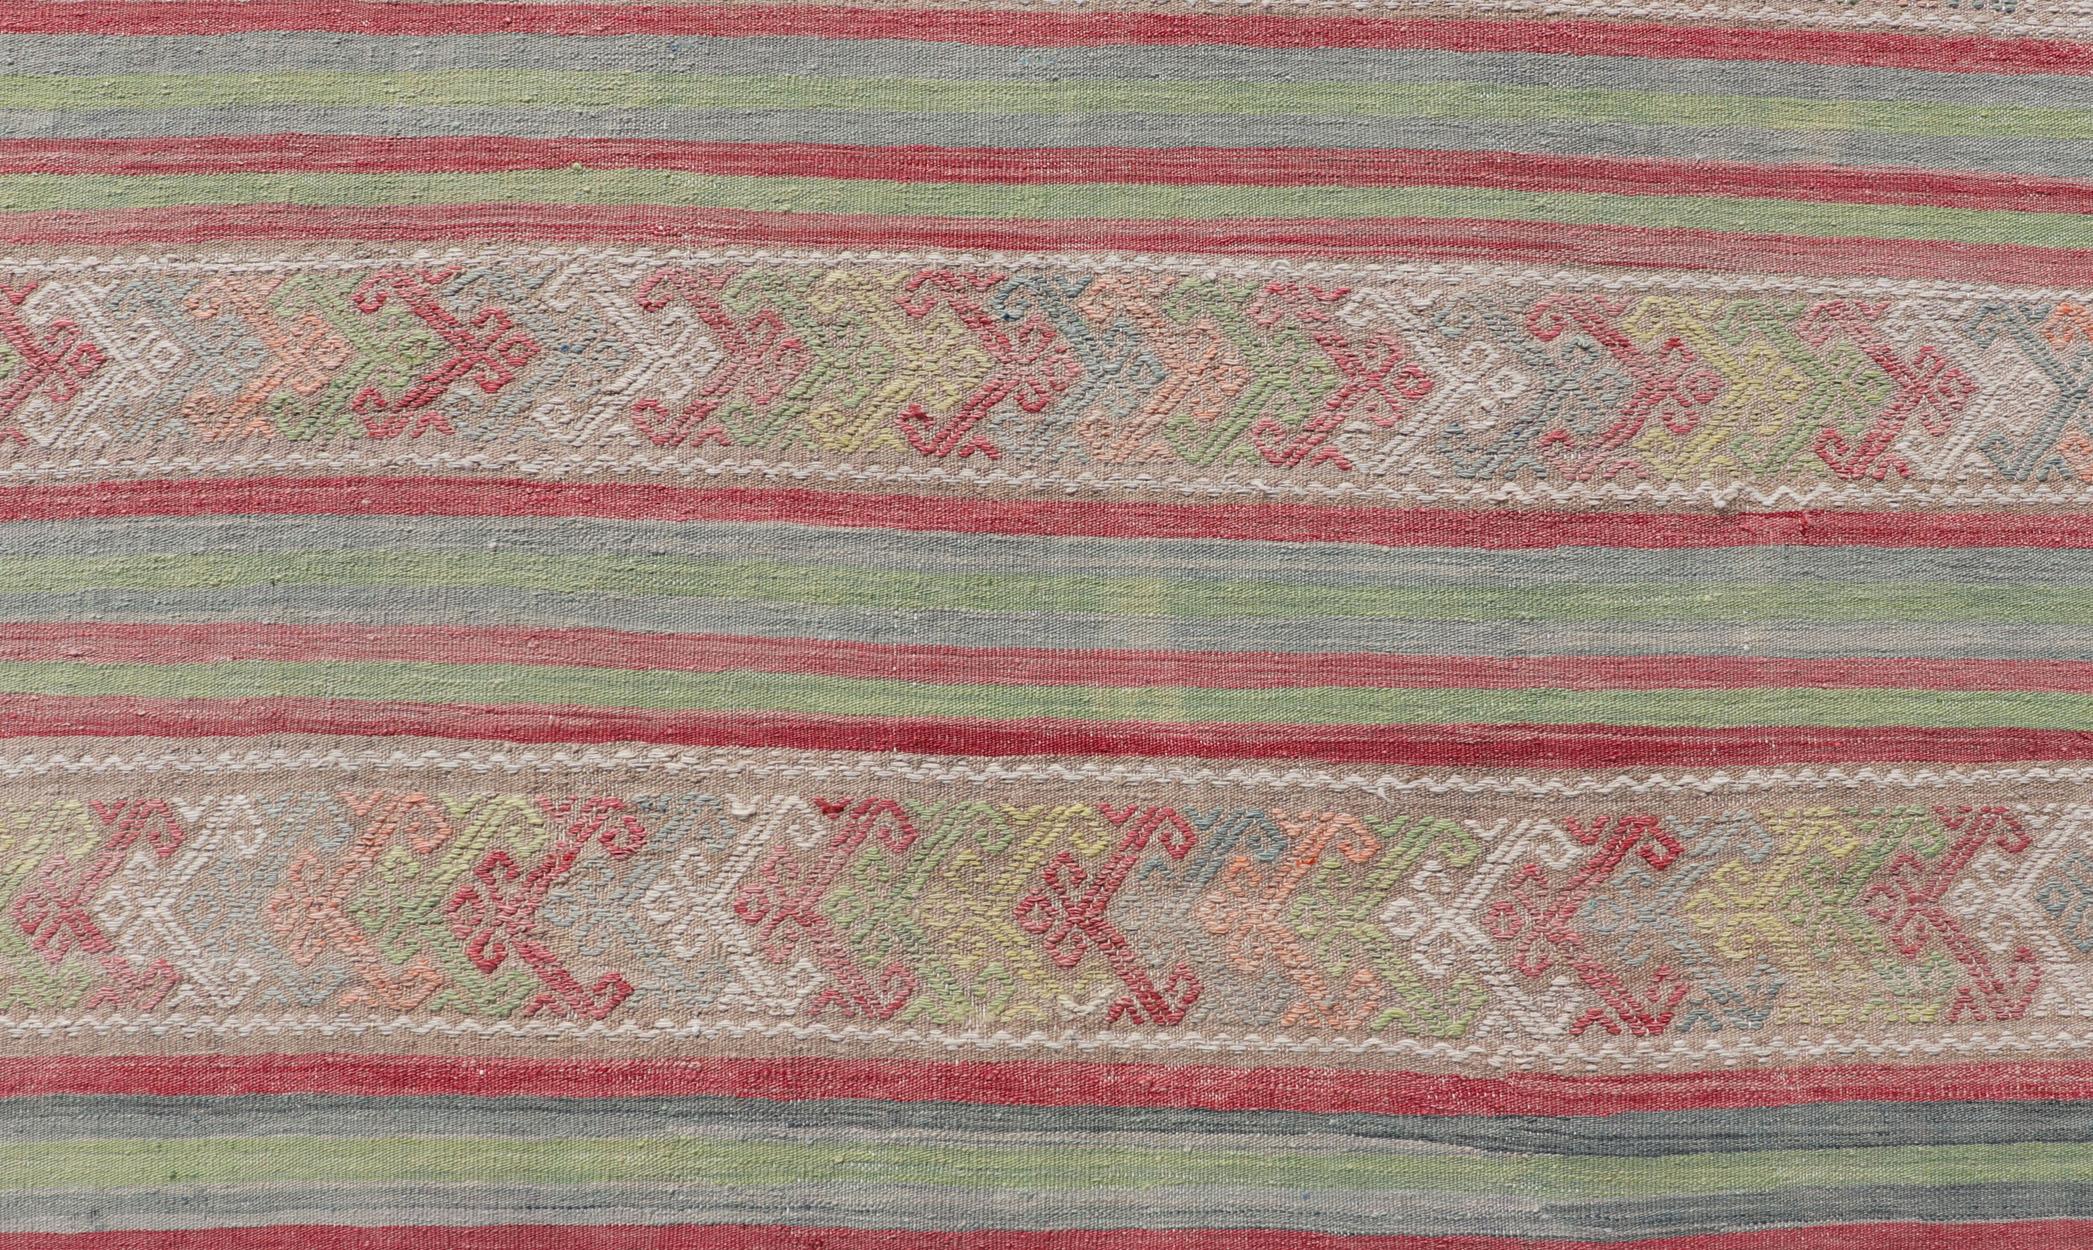 Geometric stripe design Kilim rug in multi-colors, Keivan Woven Arts / rug EN-P13028, country of origin / type: Turkey / Kilim, circa 1950

Measures: 7 x 10'3 

This vintage Kilim displays an array of designs, including a striped pattern and